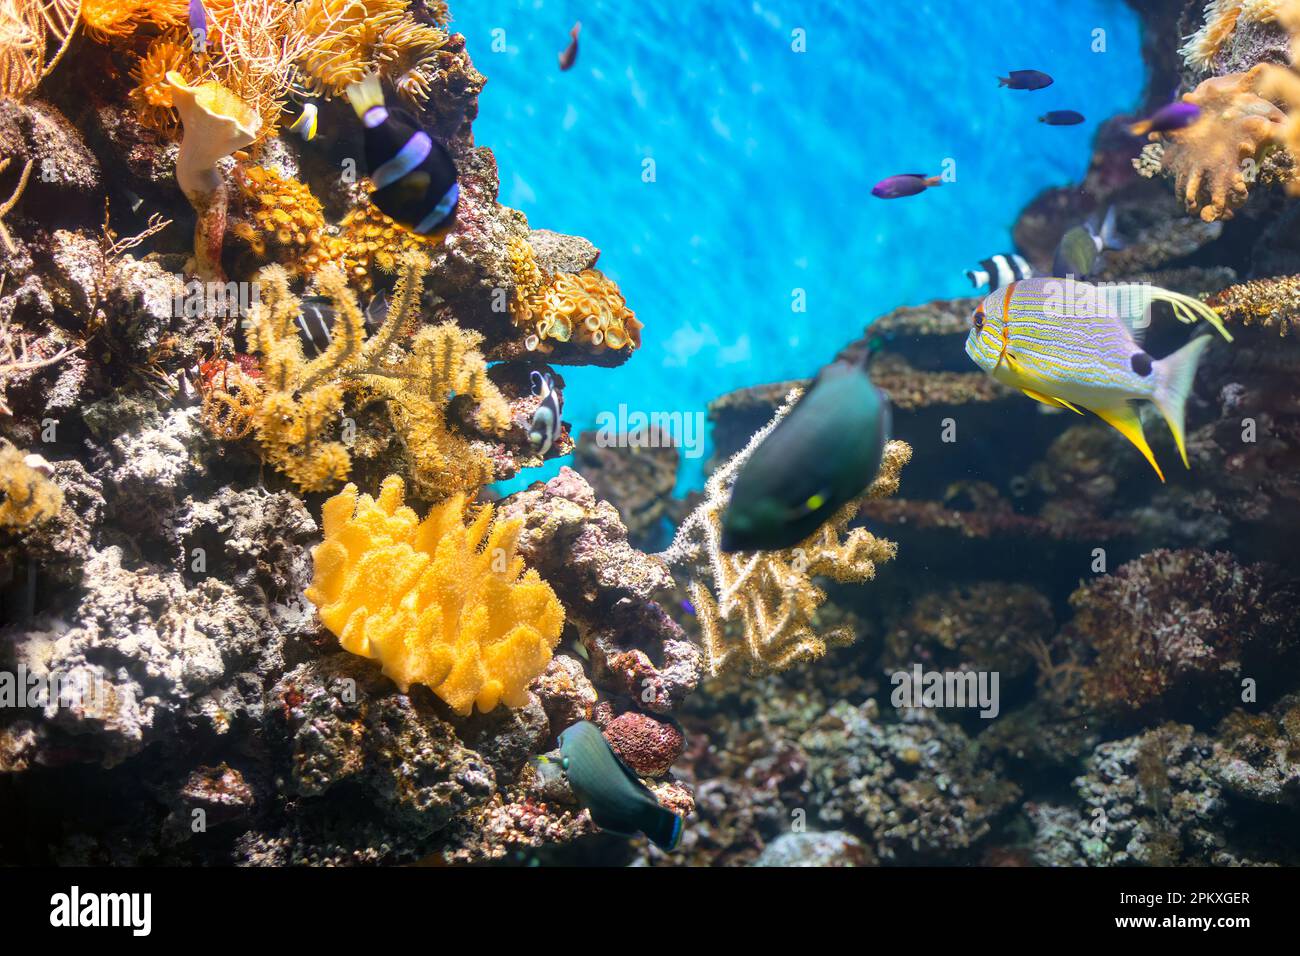 Coral reefs: rainforests of the sea